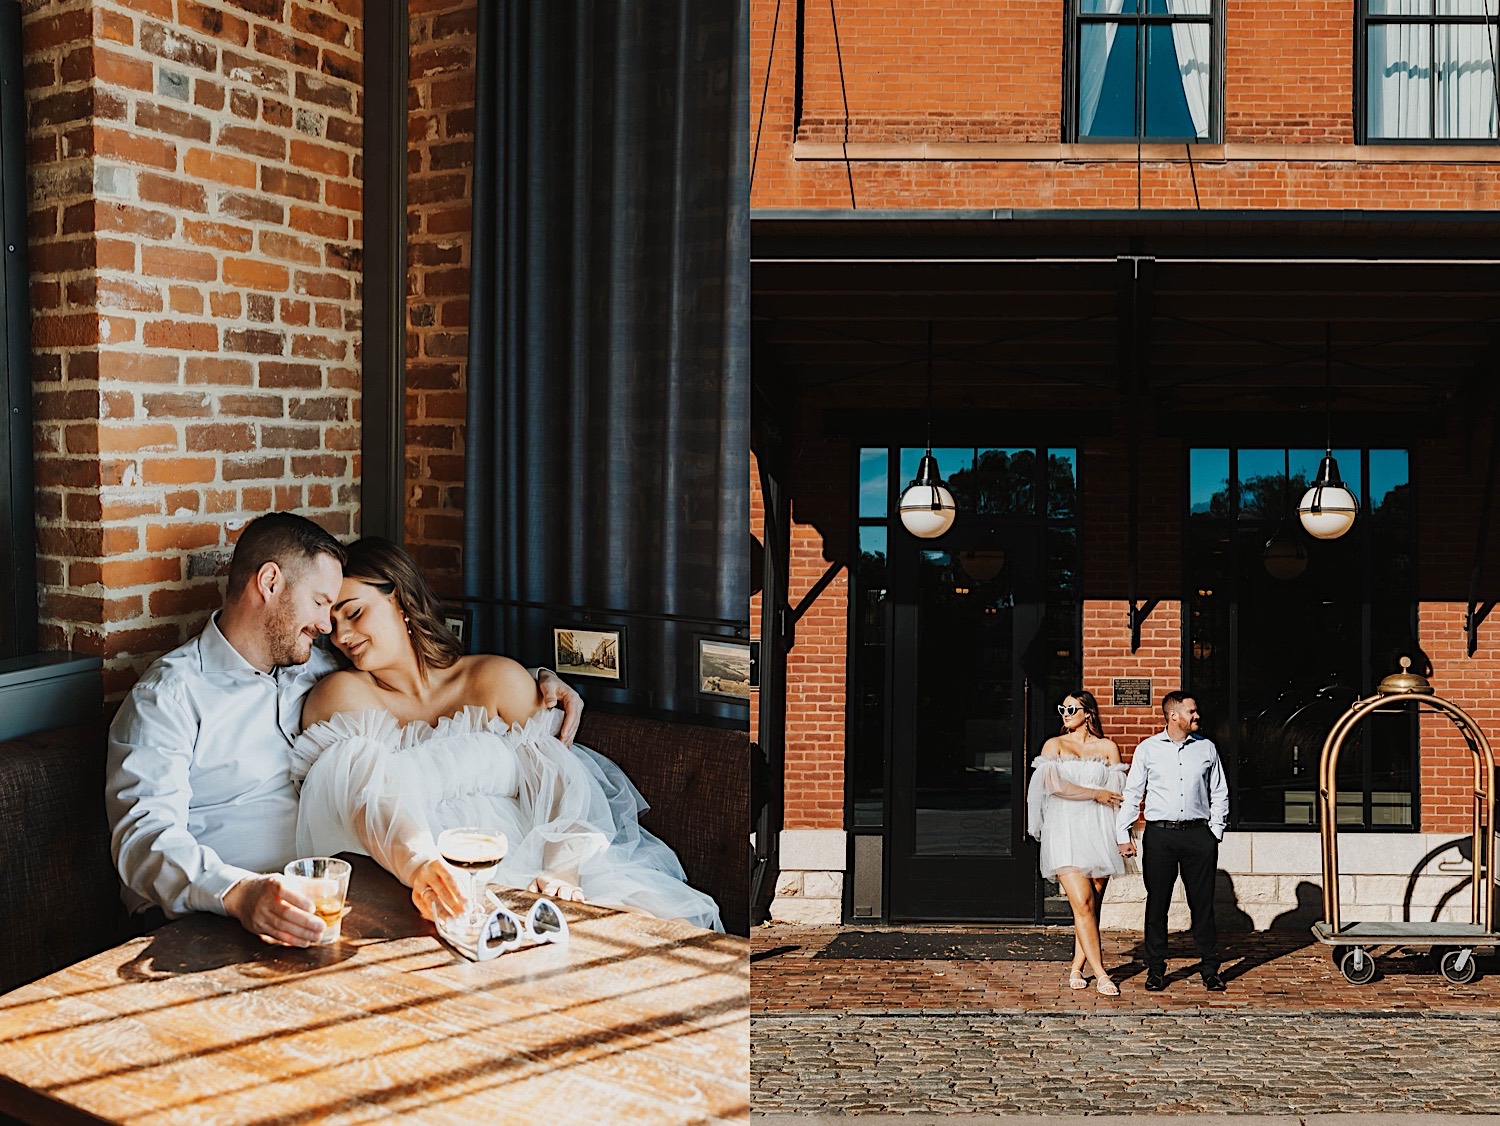 2 photos side by side of a couple in Minneapolis, the left is of them cuddling while sitting in a restaurant, the right is of them standing outside of the restaurant and holding hands